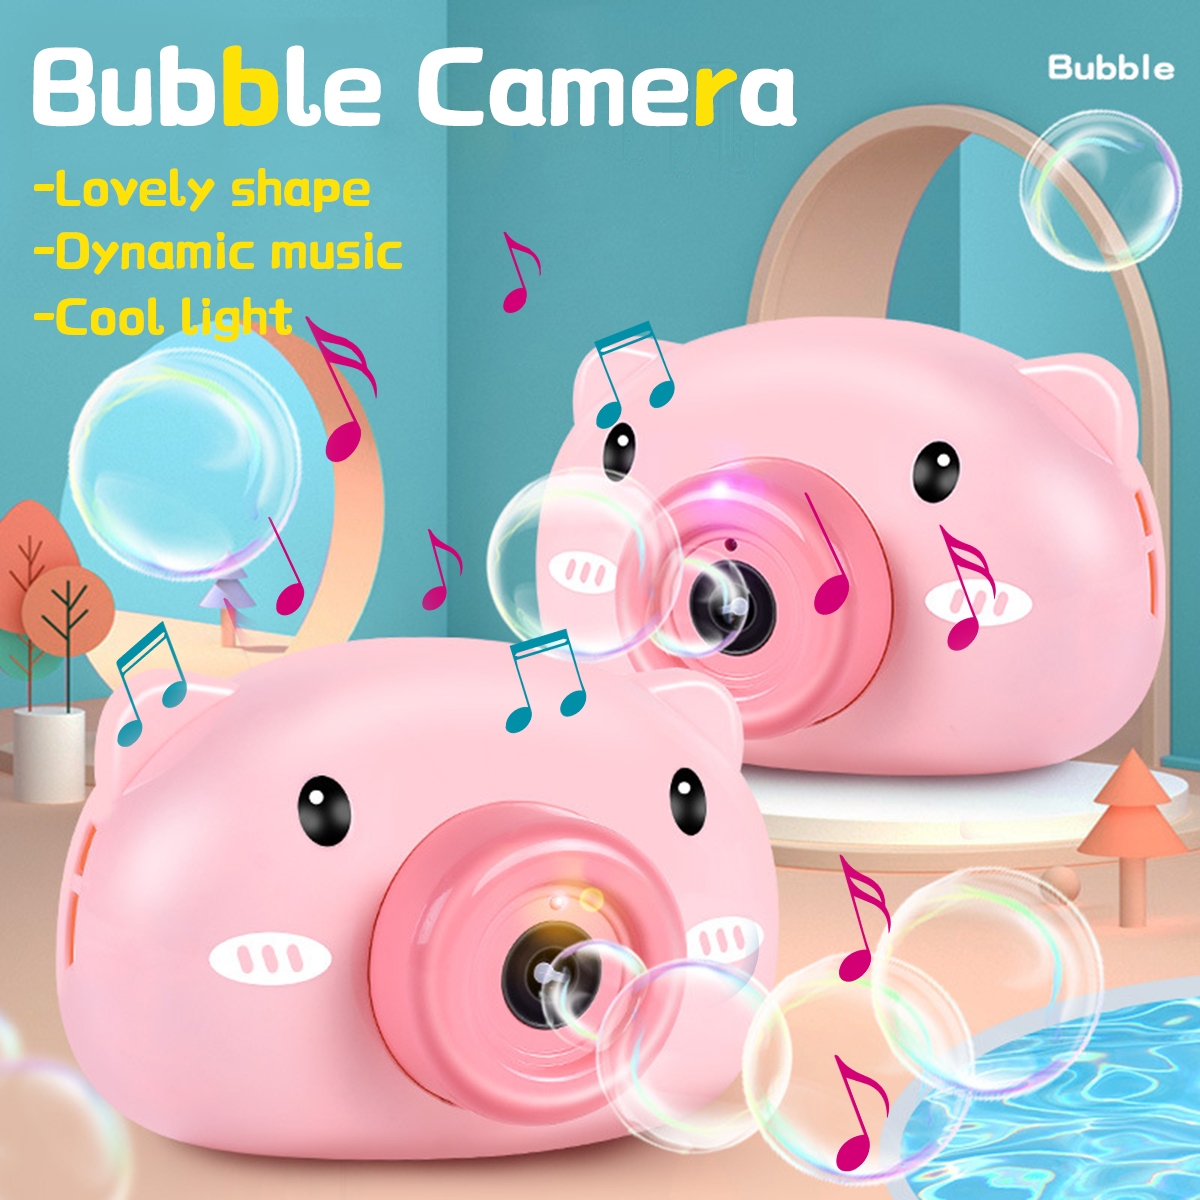 Cute Funny Bubble Camera Automatic Bubble Output Indoors and Outdoors Toys for Kids Play Gift